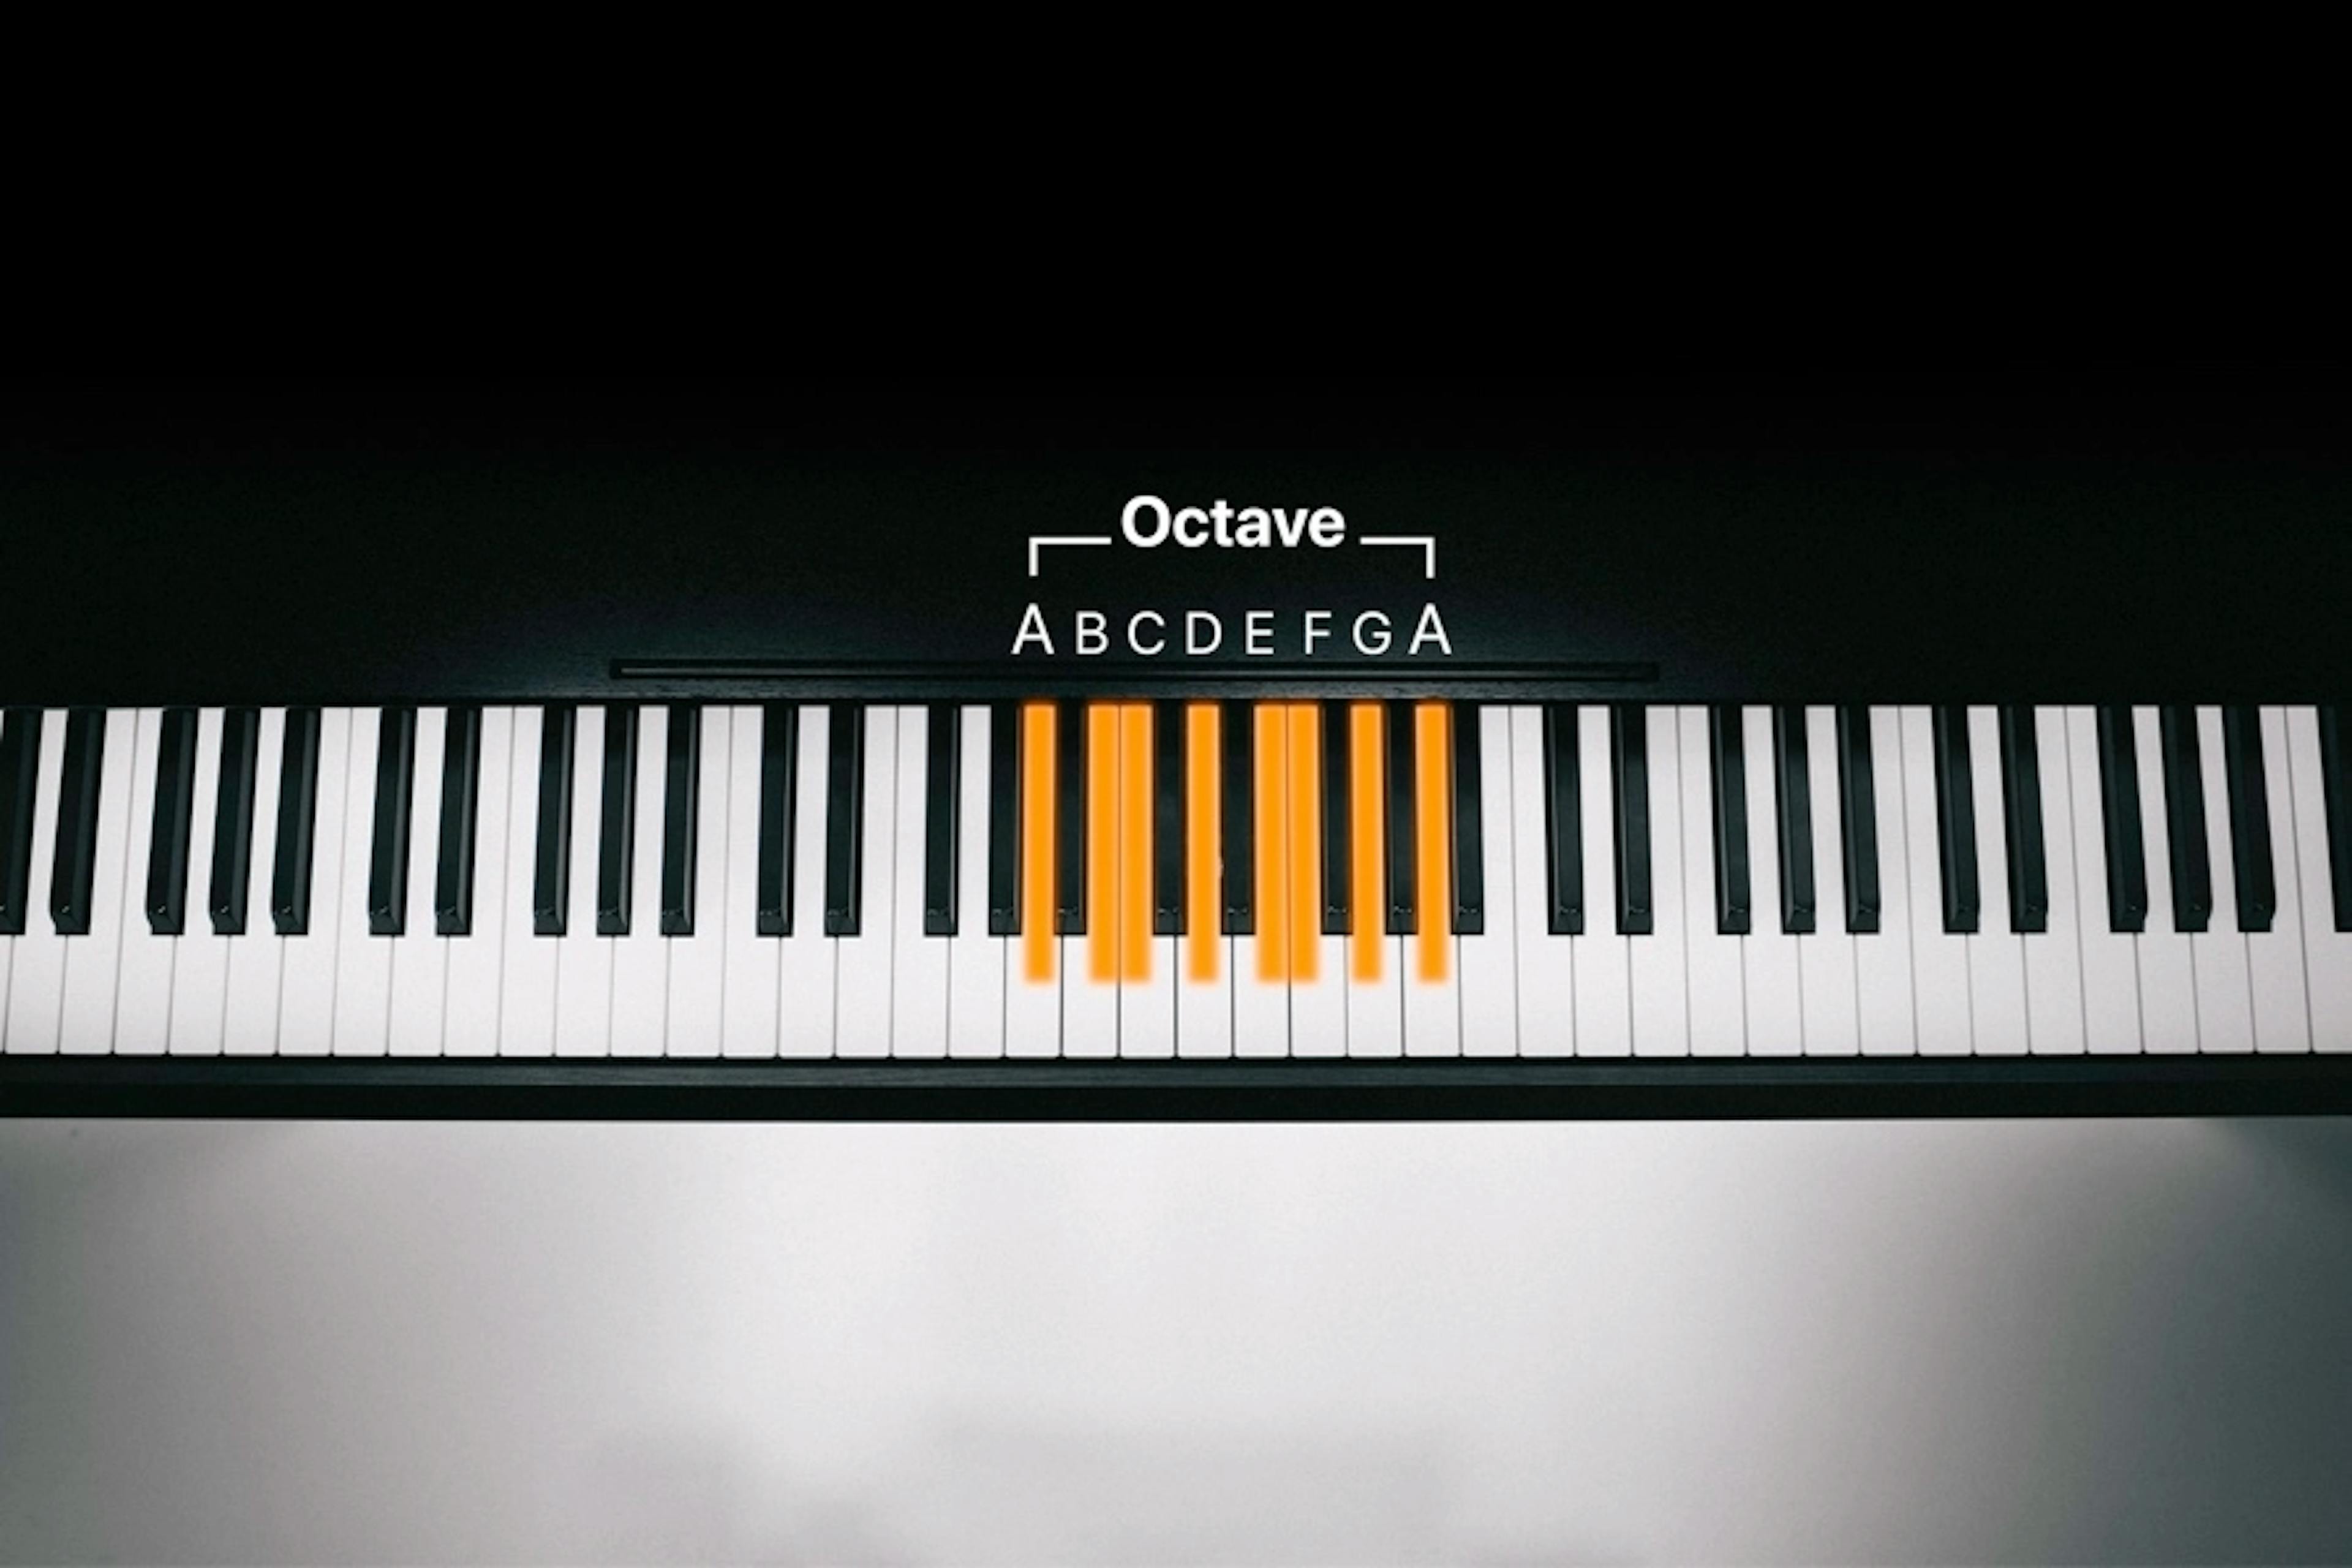 Octave 